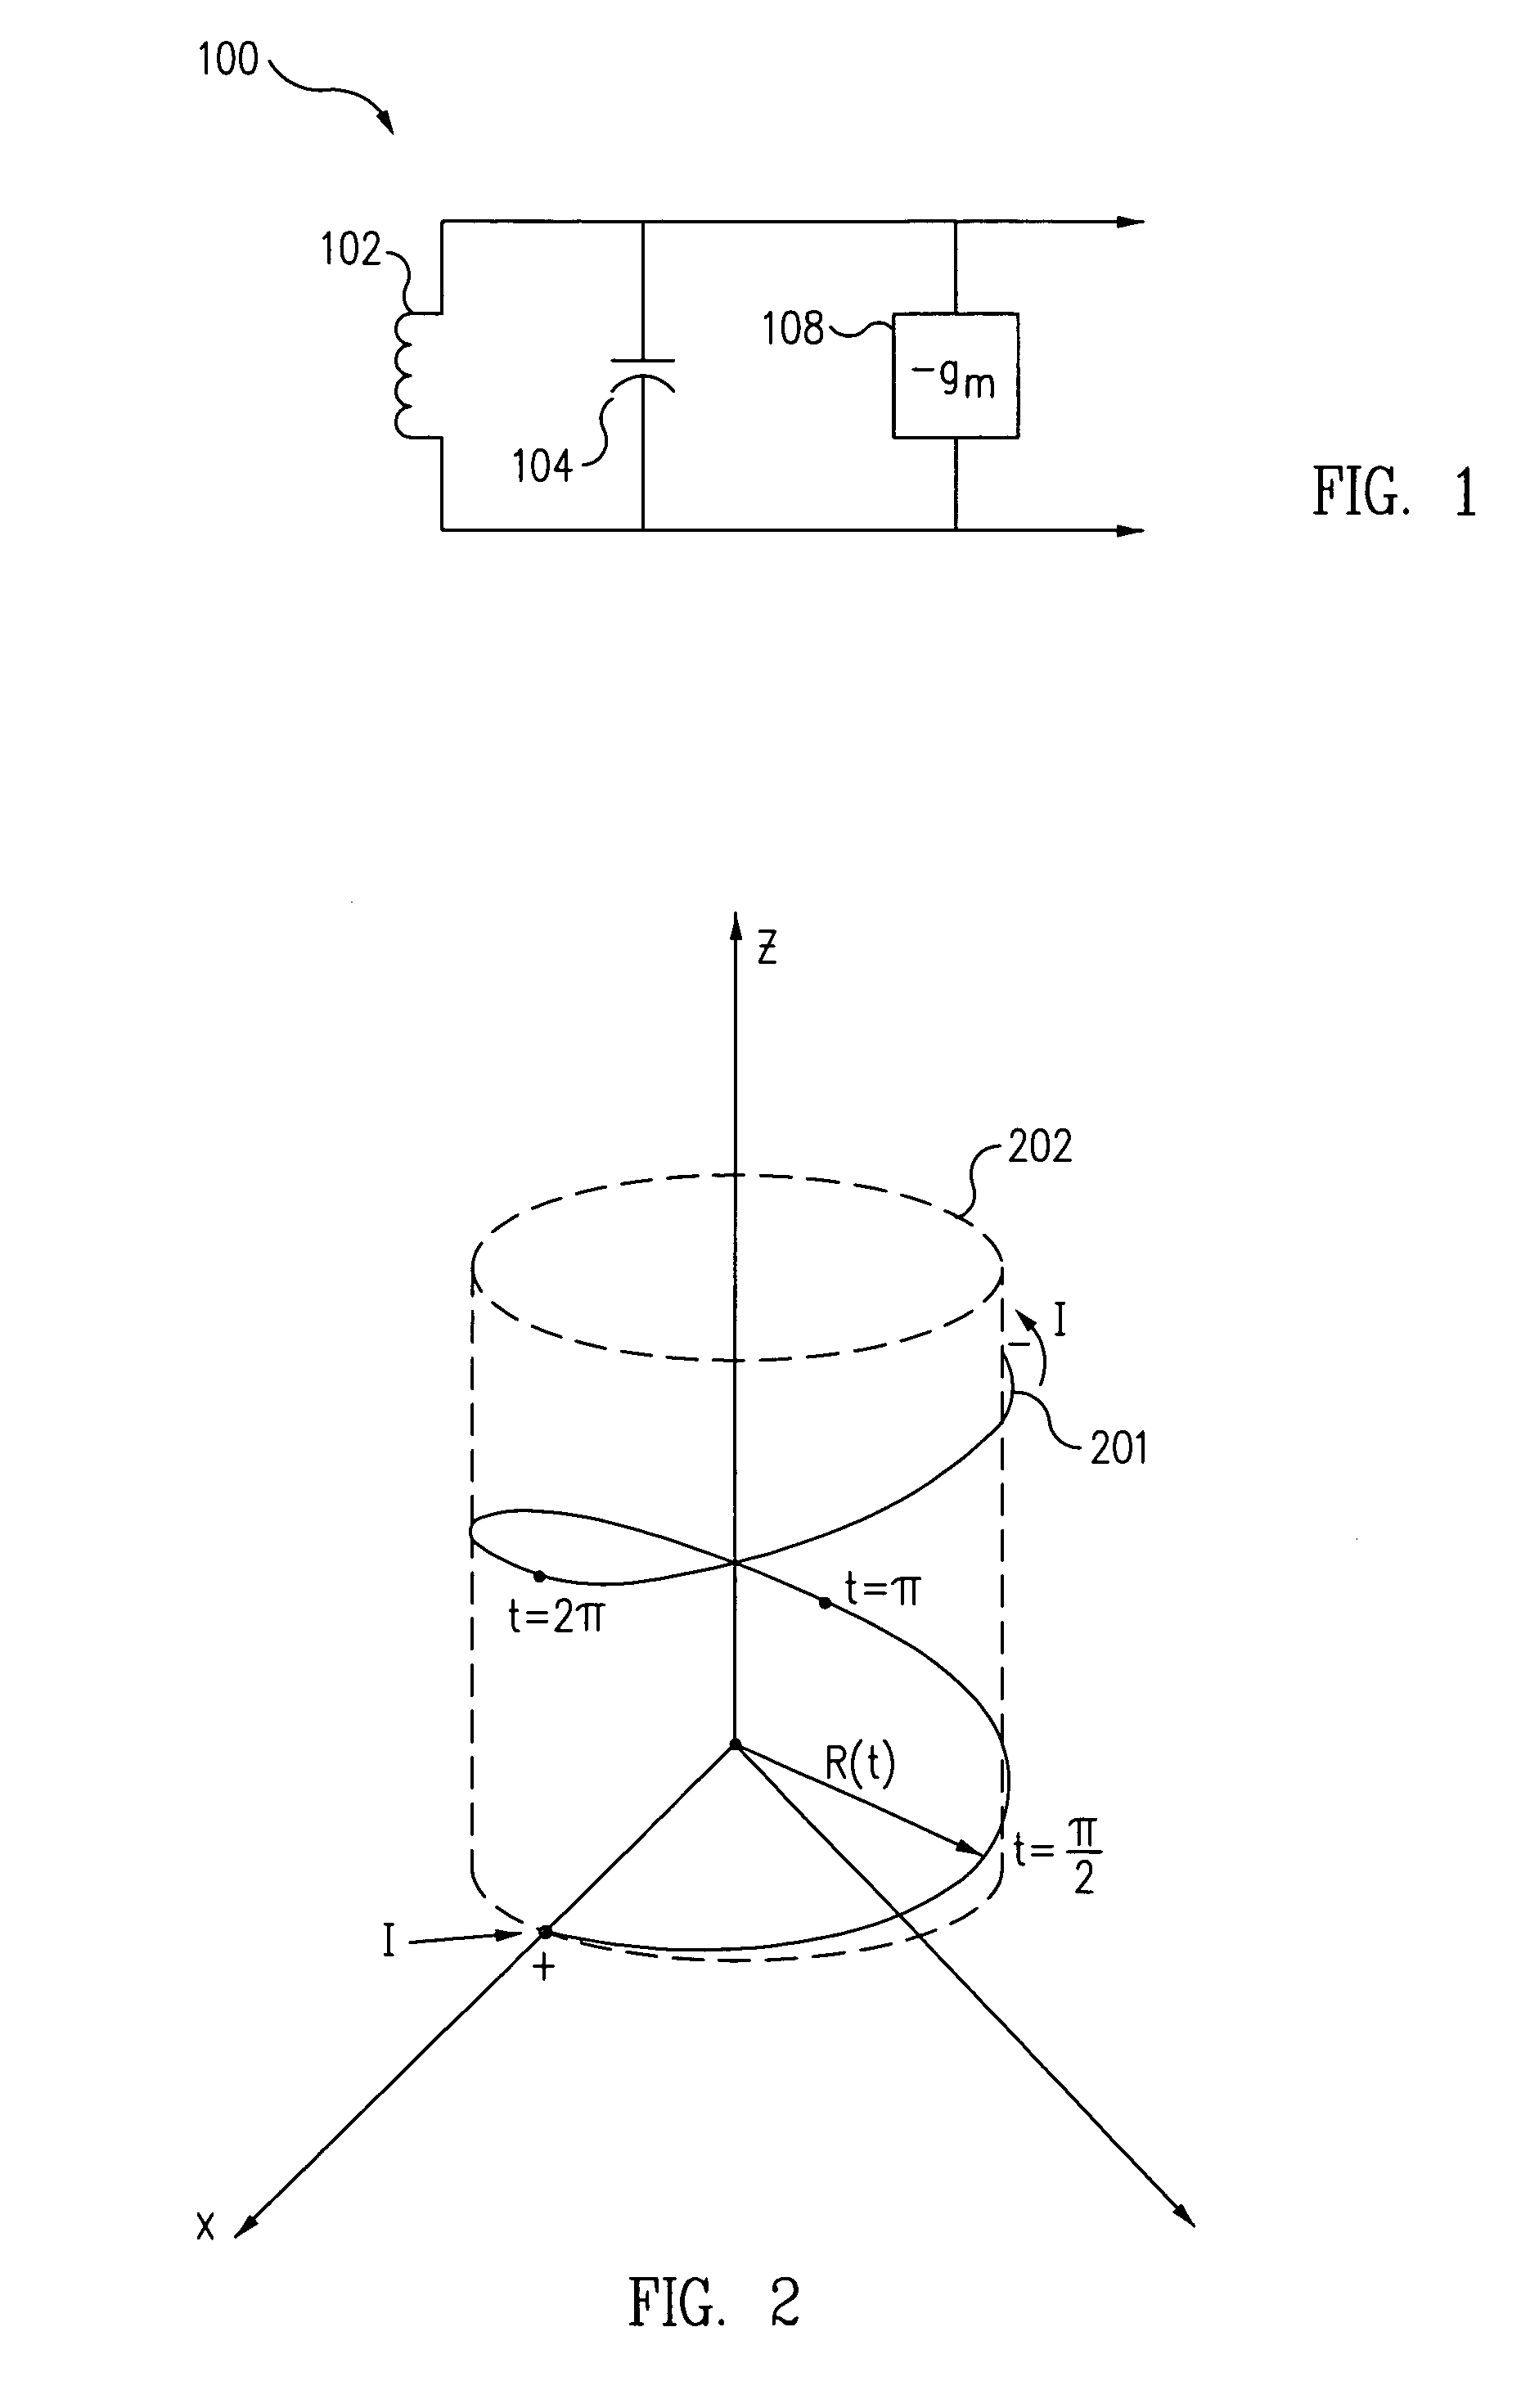 Self-shielding inductor